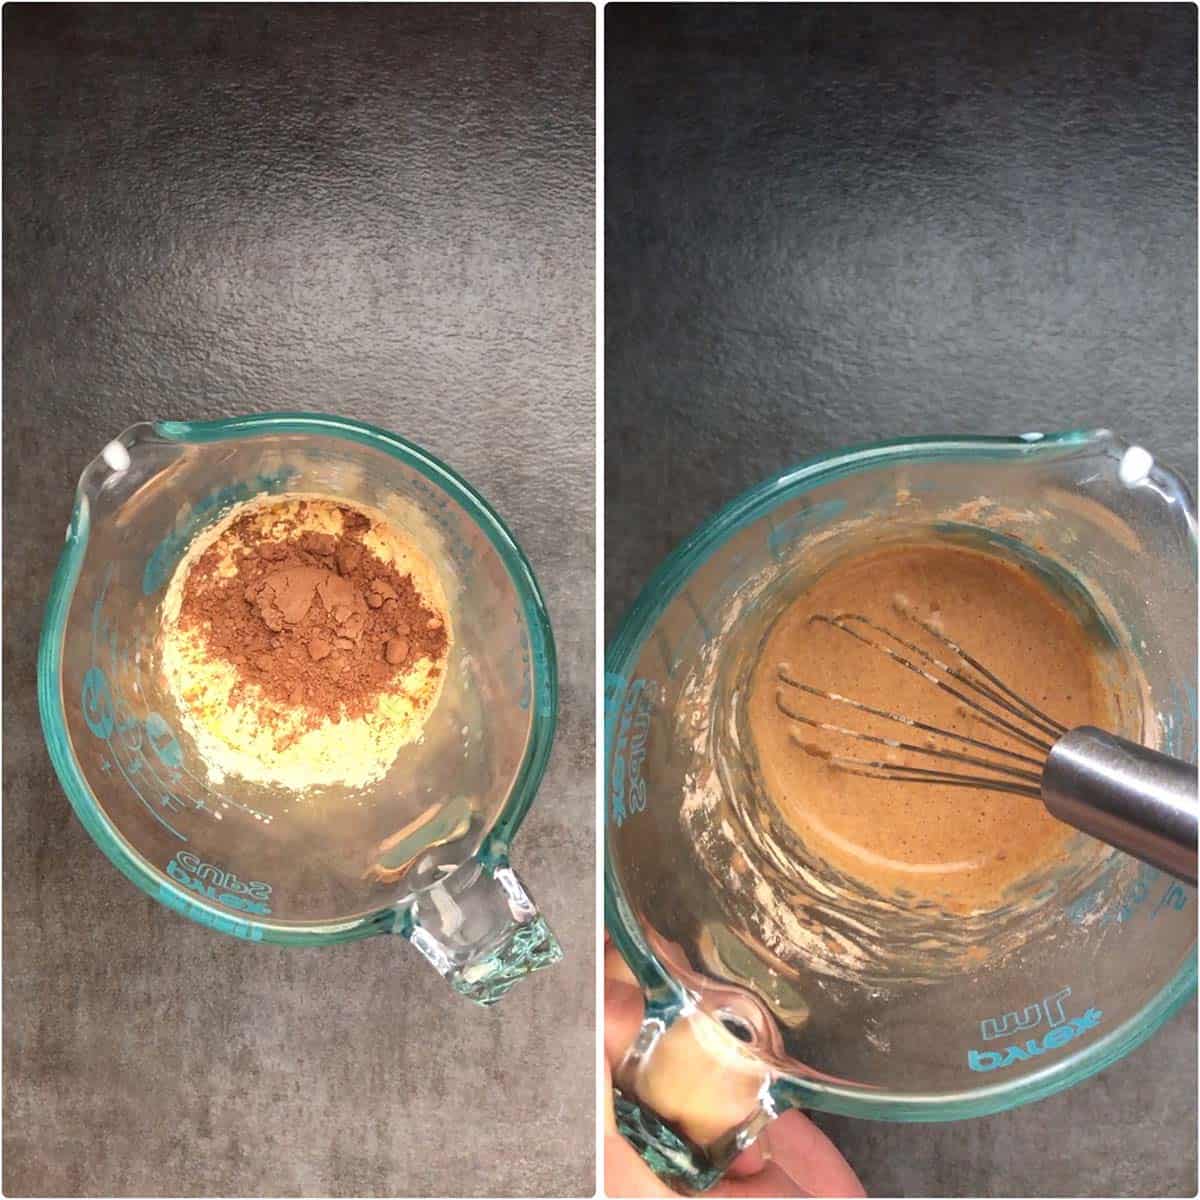 2 panel photo showing the mixing of ingredients in a measuring cup.